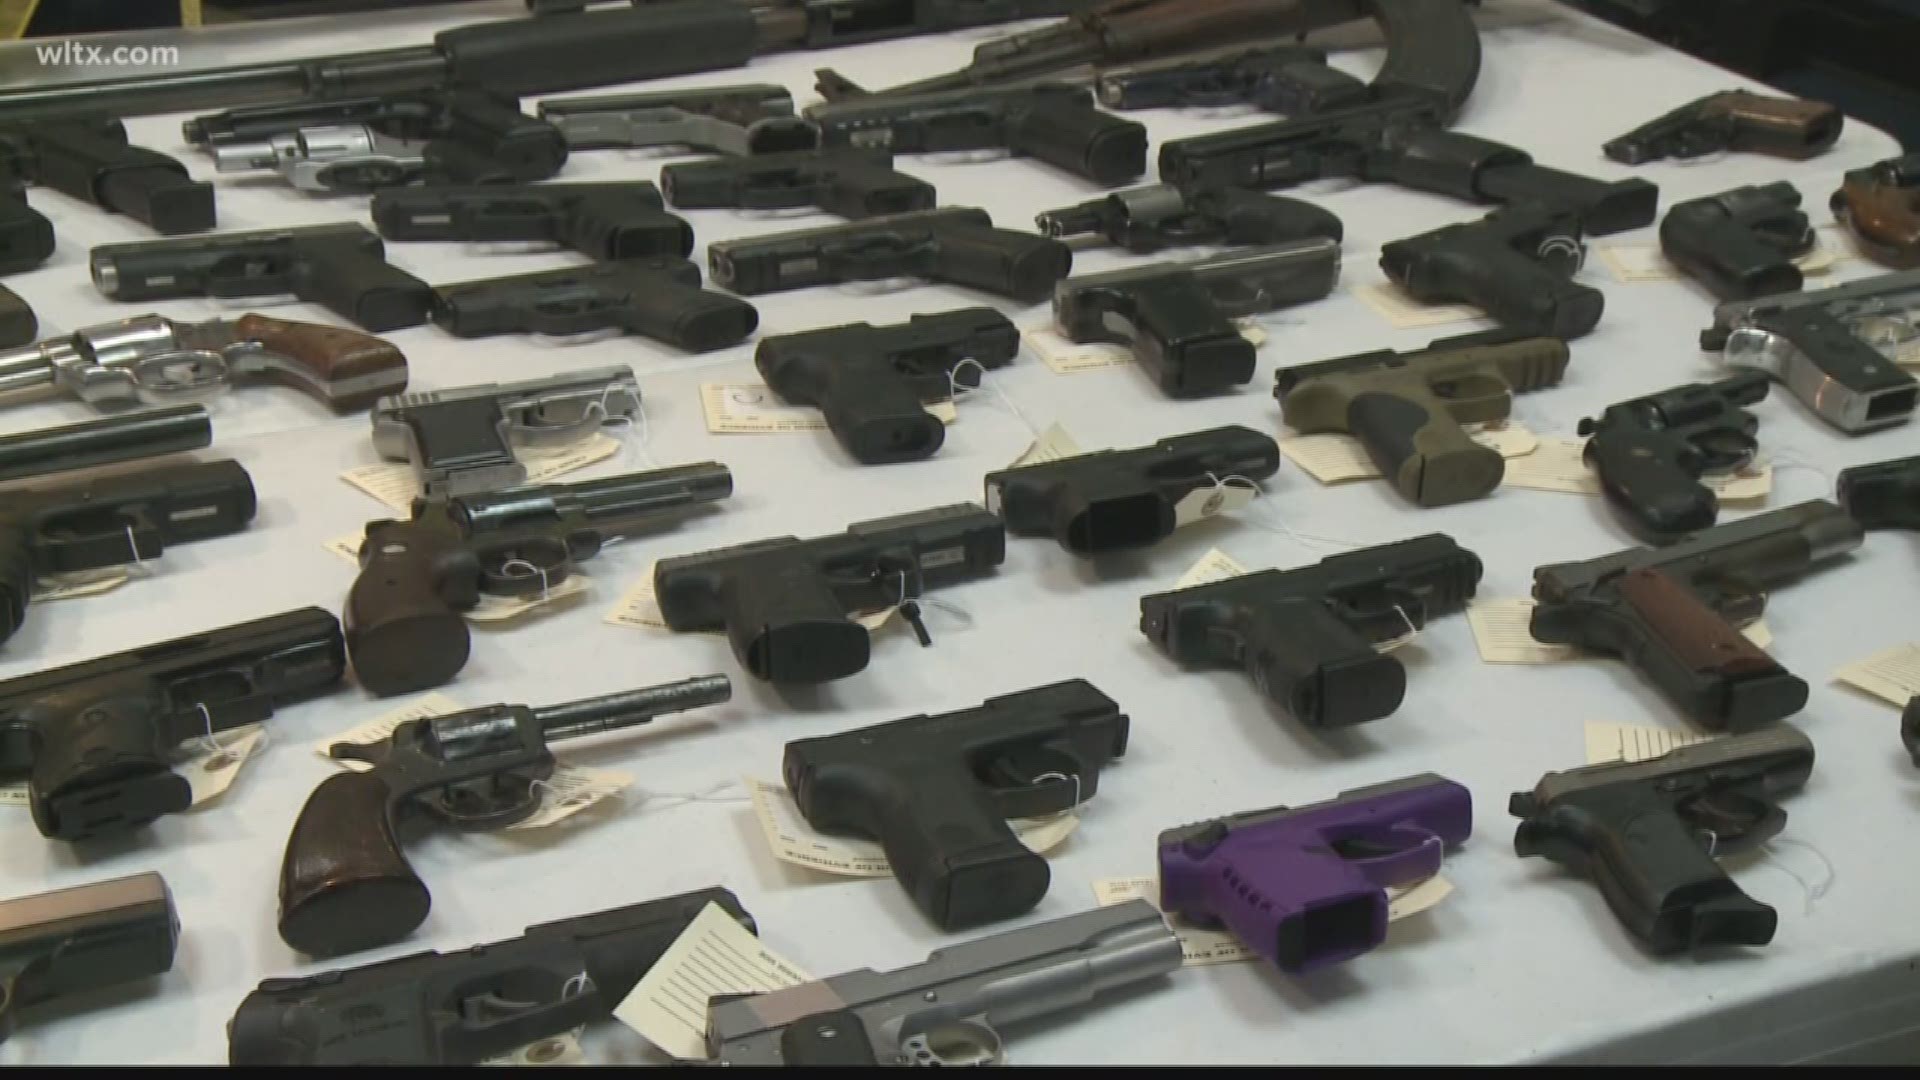 State lawmakers and law enforcement agencies here in the Midlands want to make it harder for criminals to get their hands on guns.